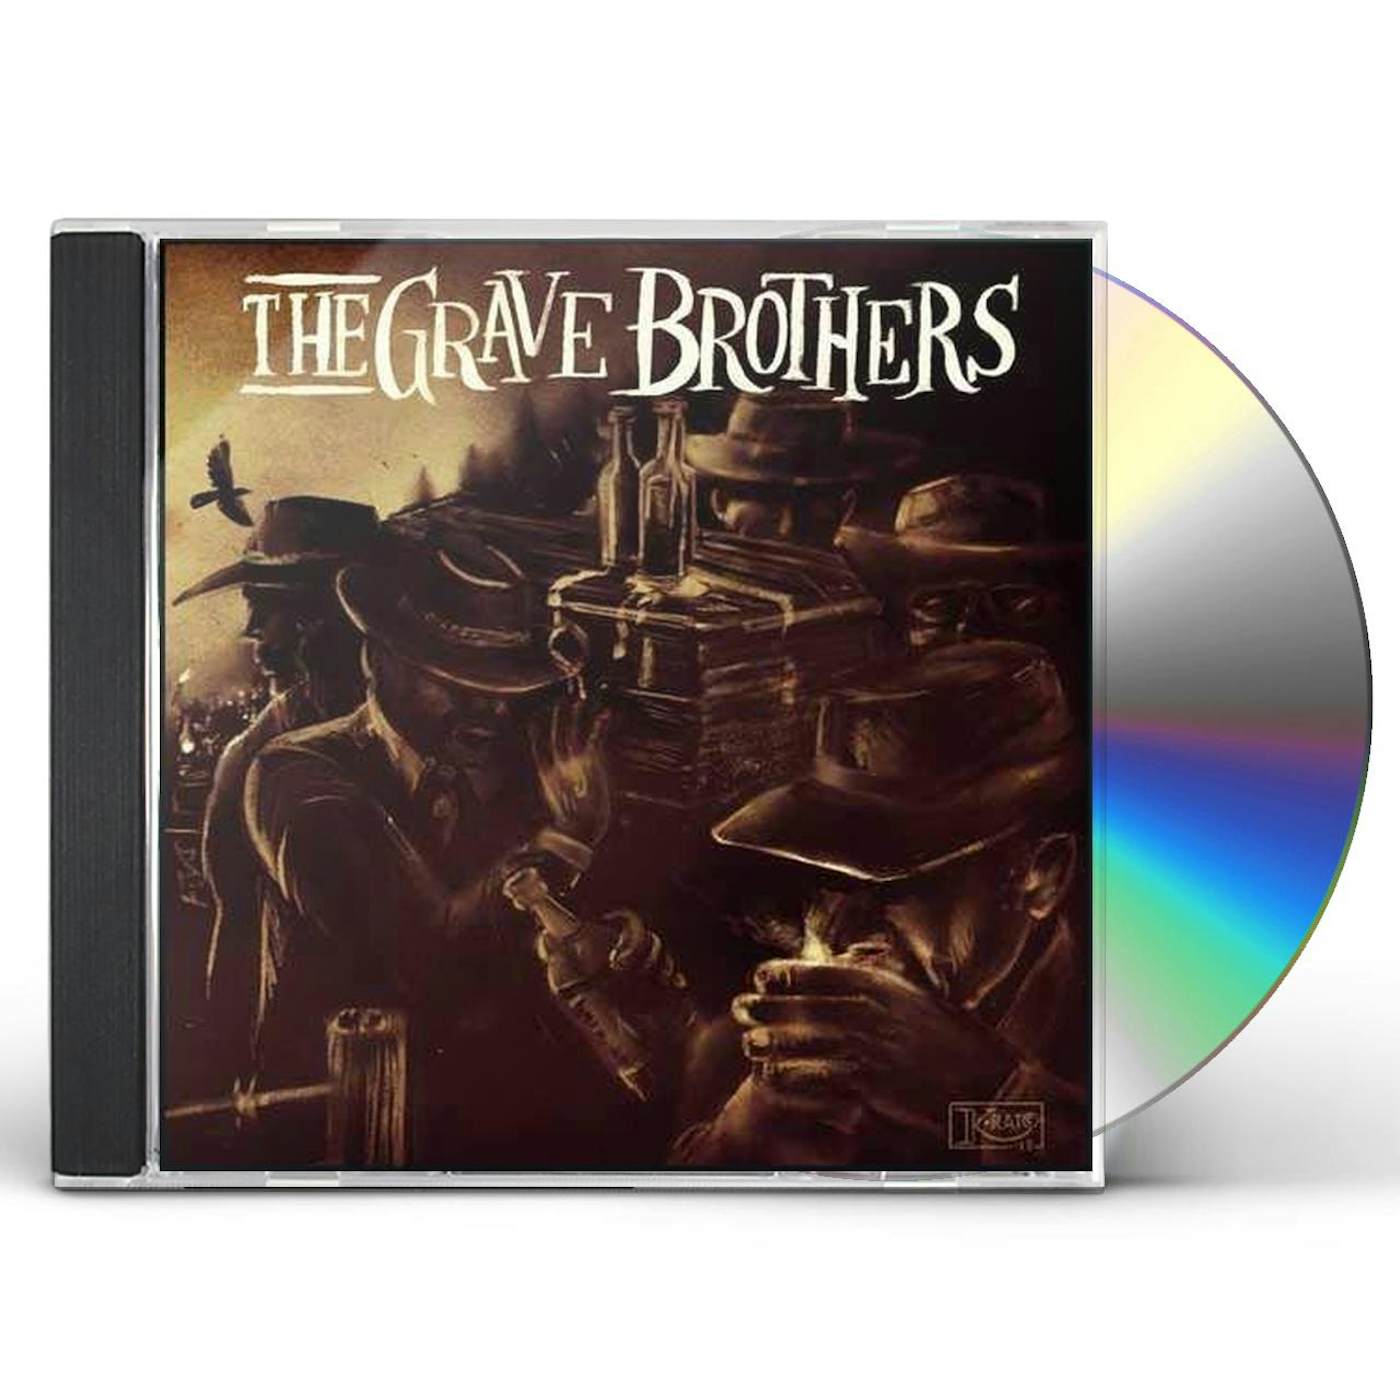 The Grave Brothers CD